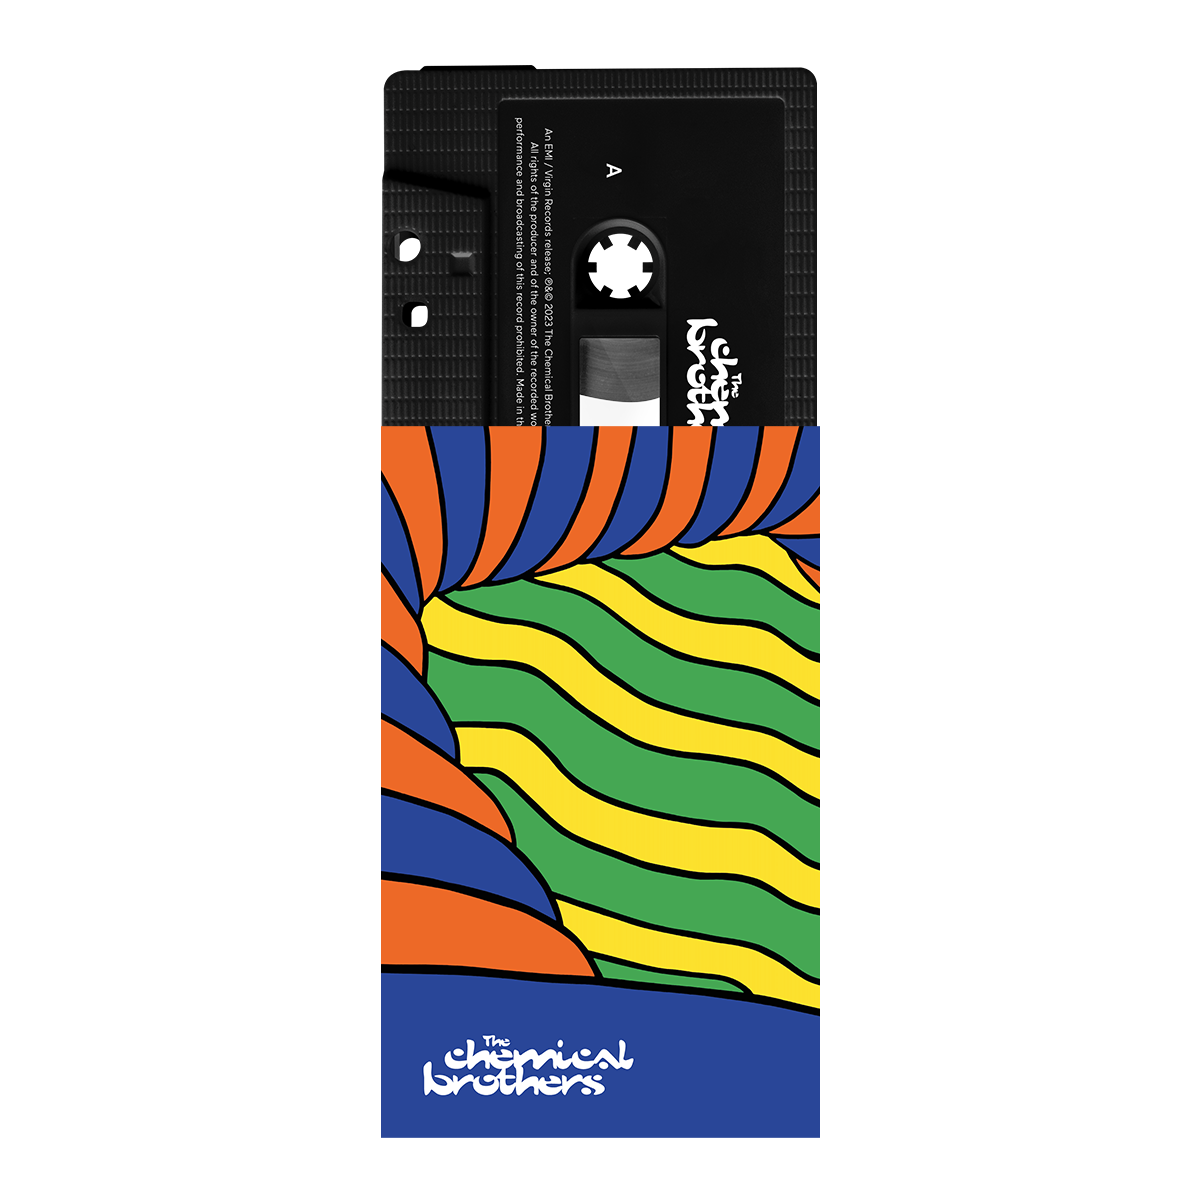 The Chemical Brothers - For That Beautiful Feeling Cassette